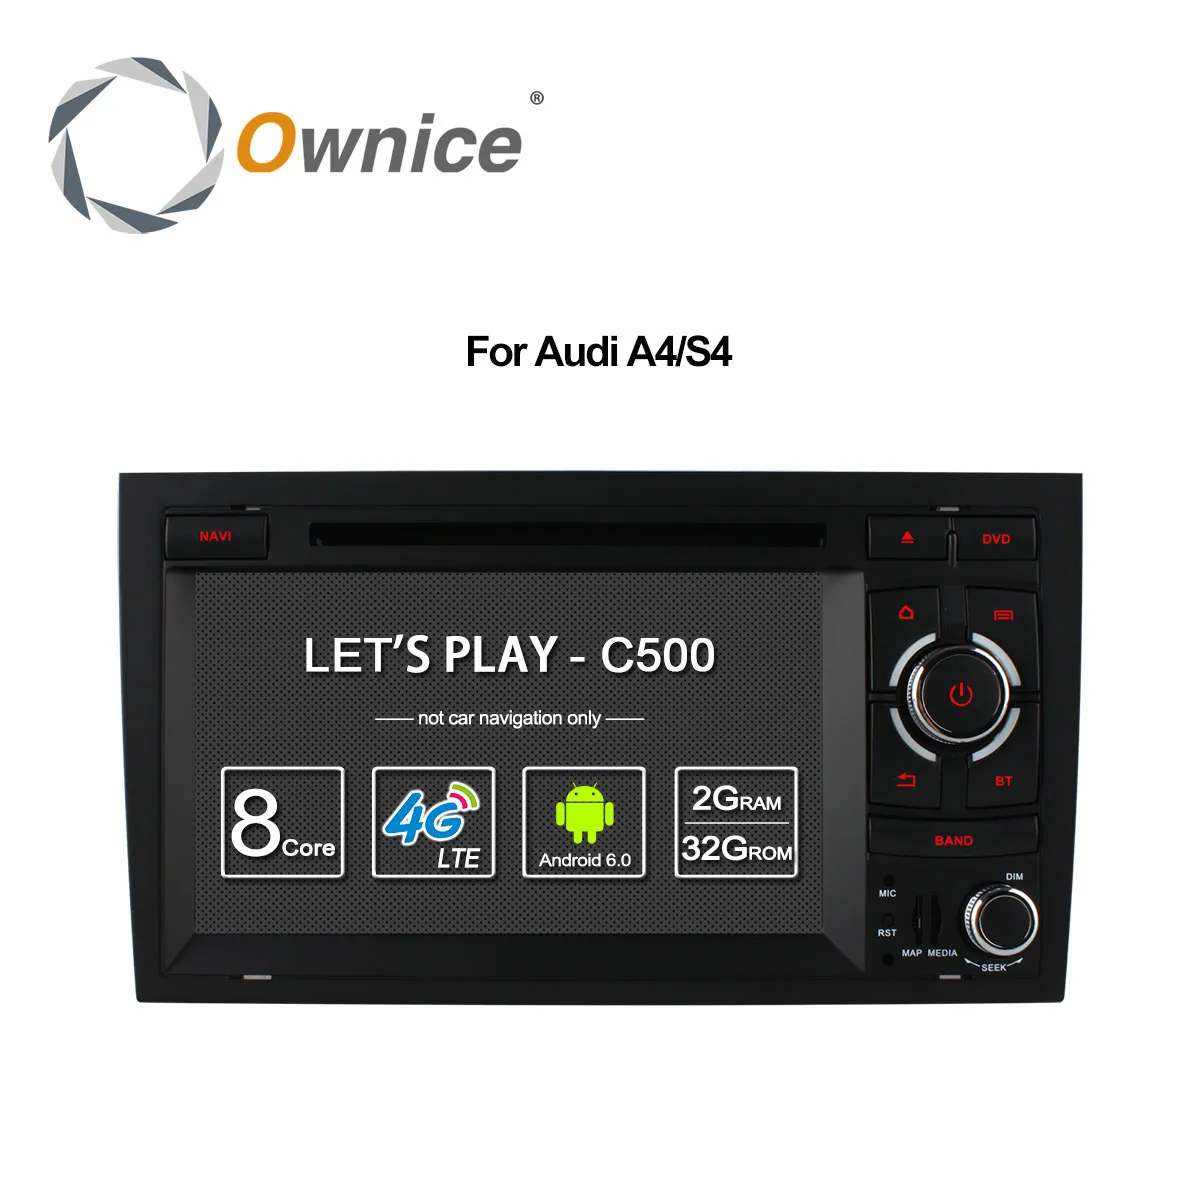 

Ownice C500 Octa 8 Core 4G SIM LTE ANDROID 6.0 CAR DVD PLAYER for Audi A4 2002-2008 wifi GPS BT Radio 2GB RAM 32GB ROM